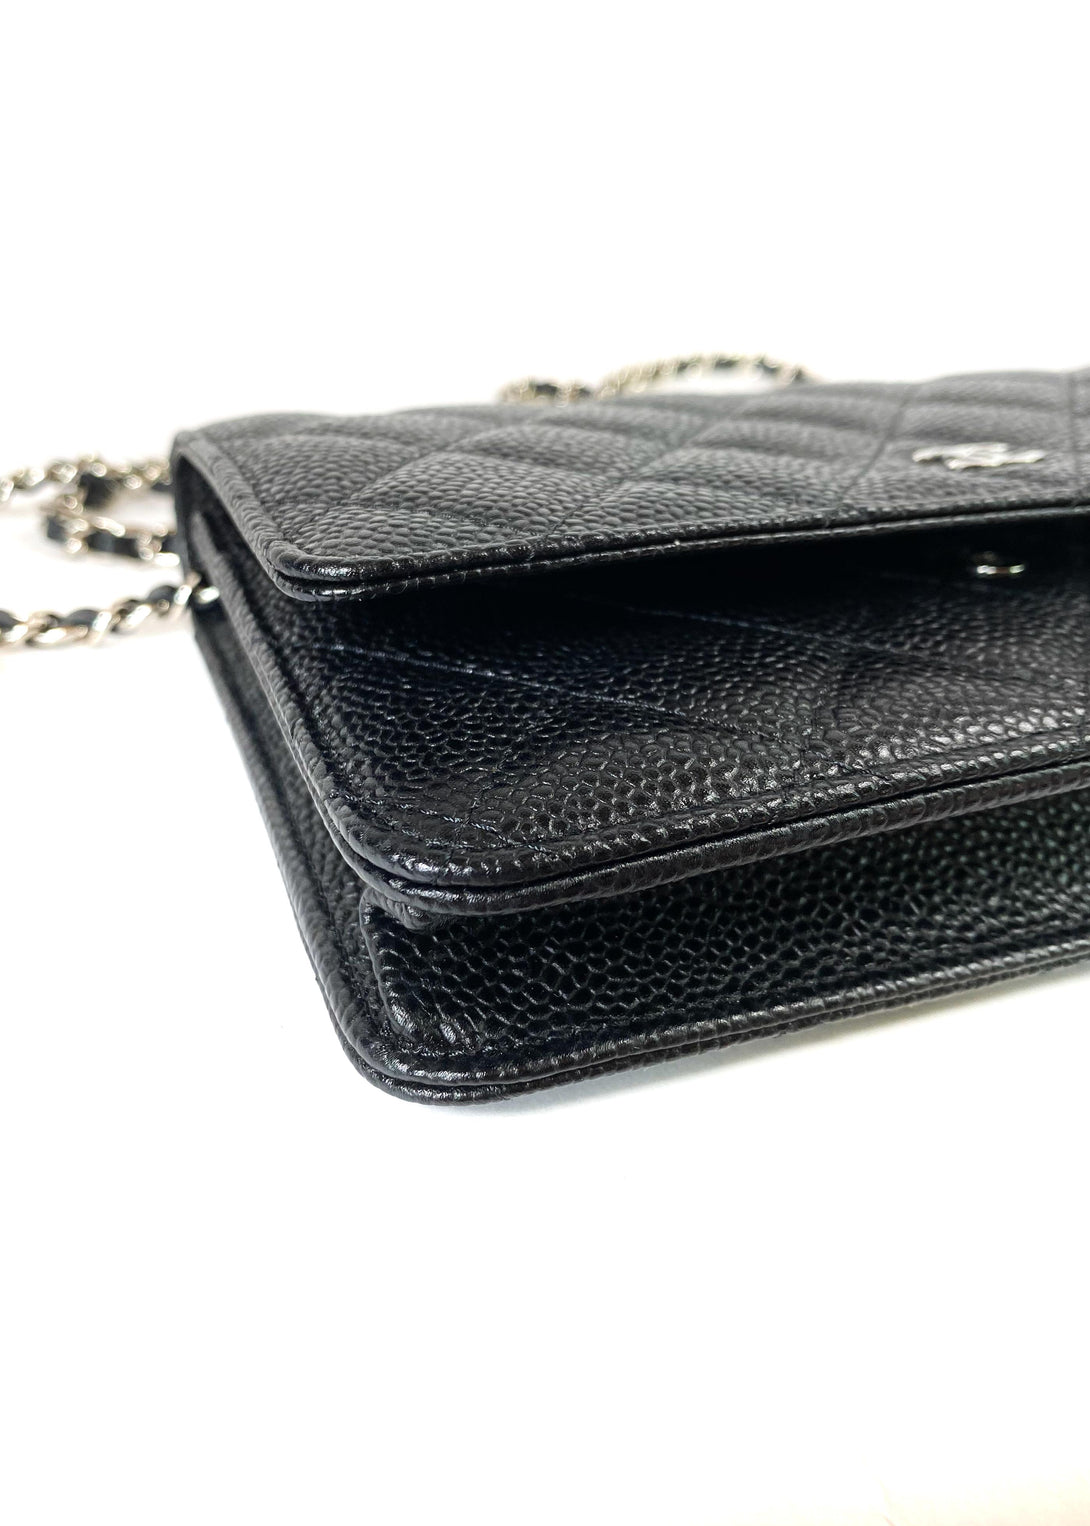 Chanel Black Caviar Leather Wallet on Chain - As Seen on Instagram 22.07.2020 - Siopaella Designer Exchange